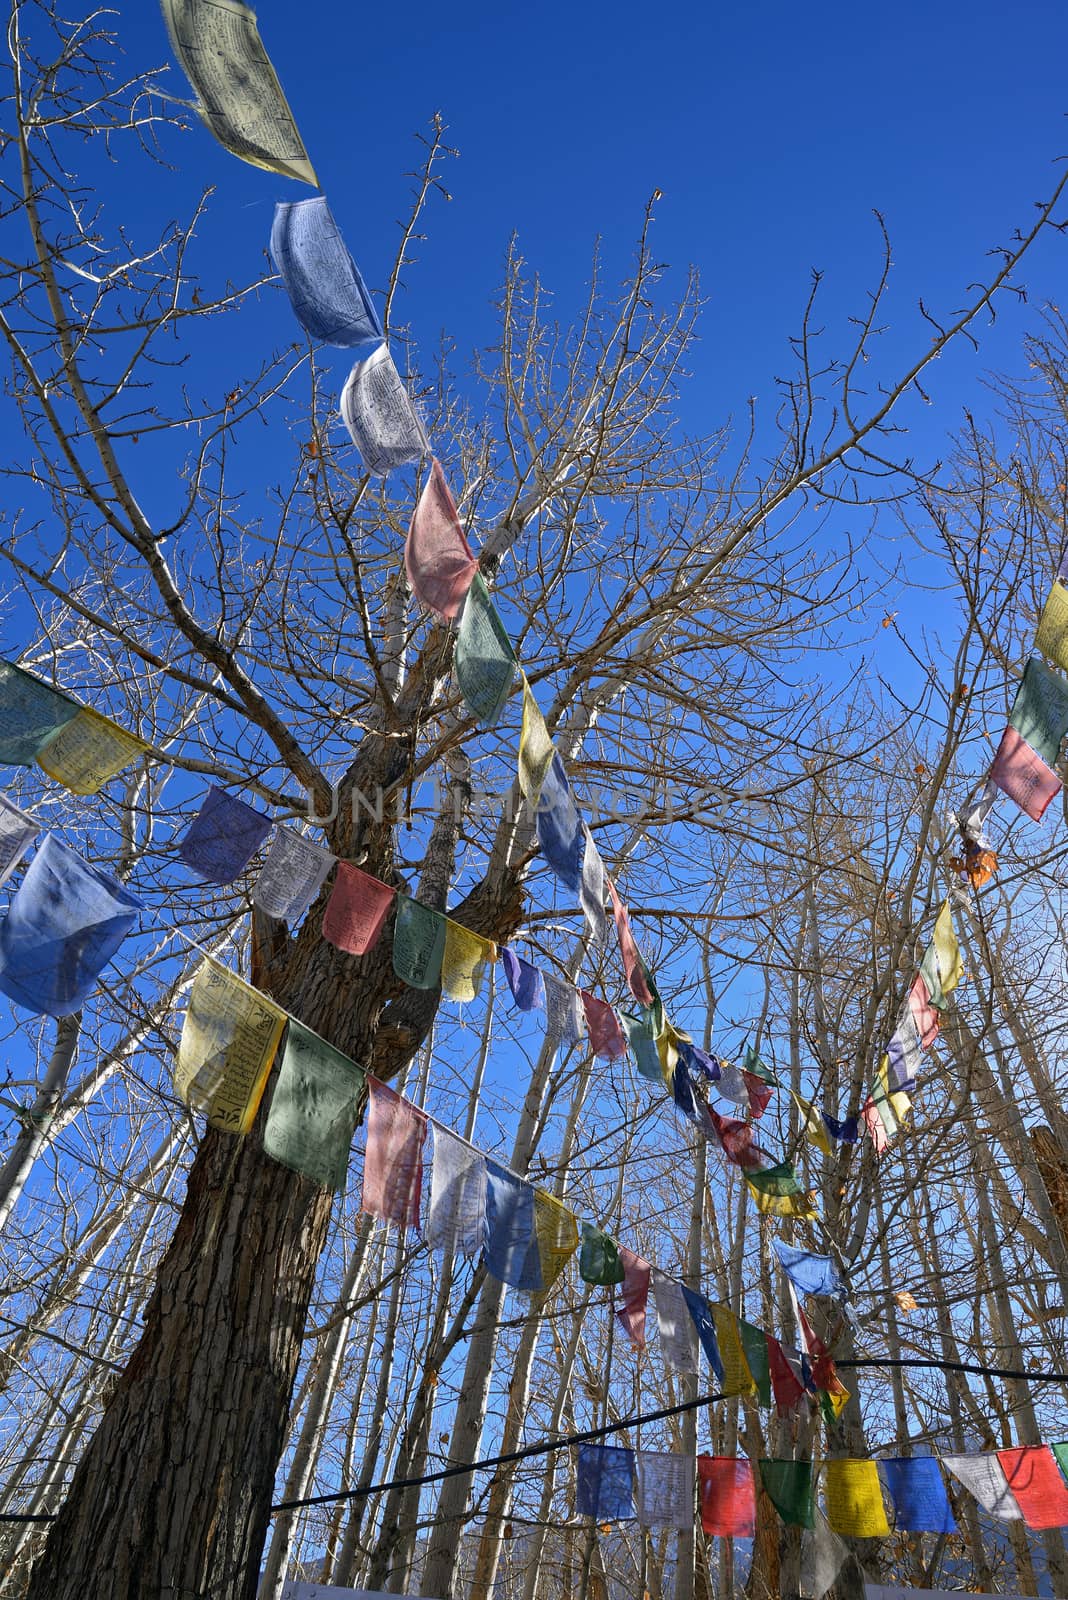 Tibetan prayer flags with trees at winter by think4photop